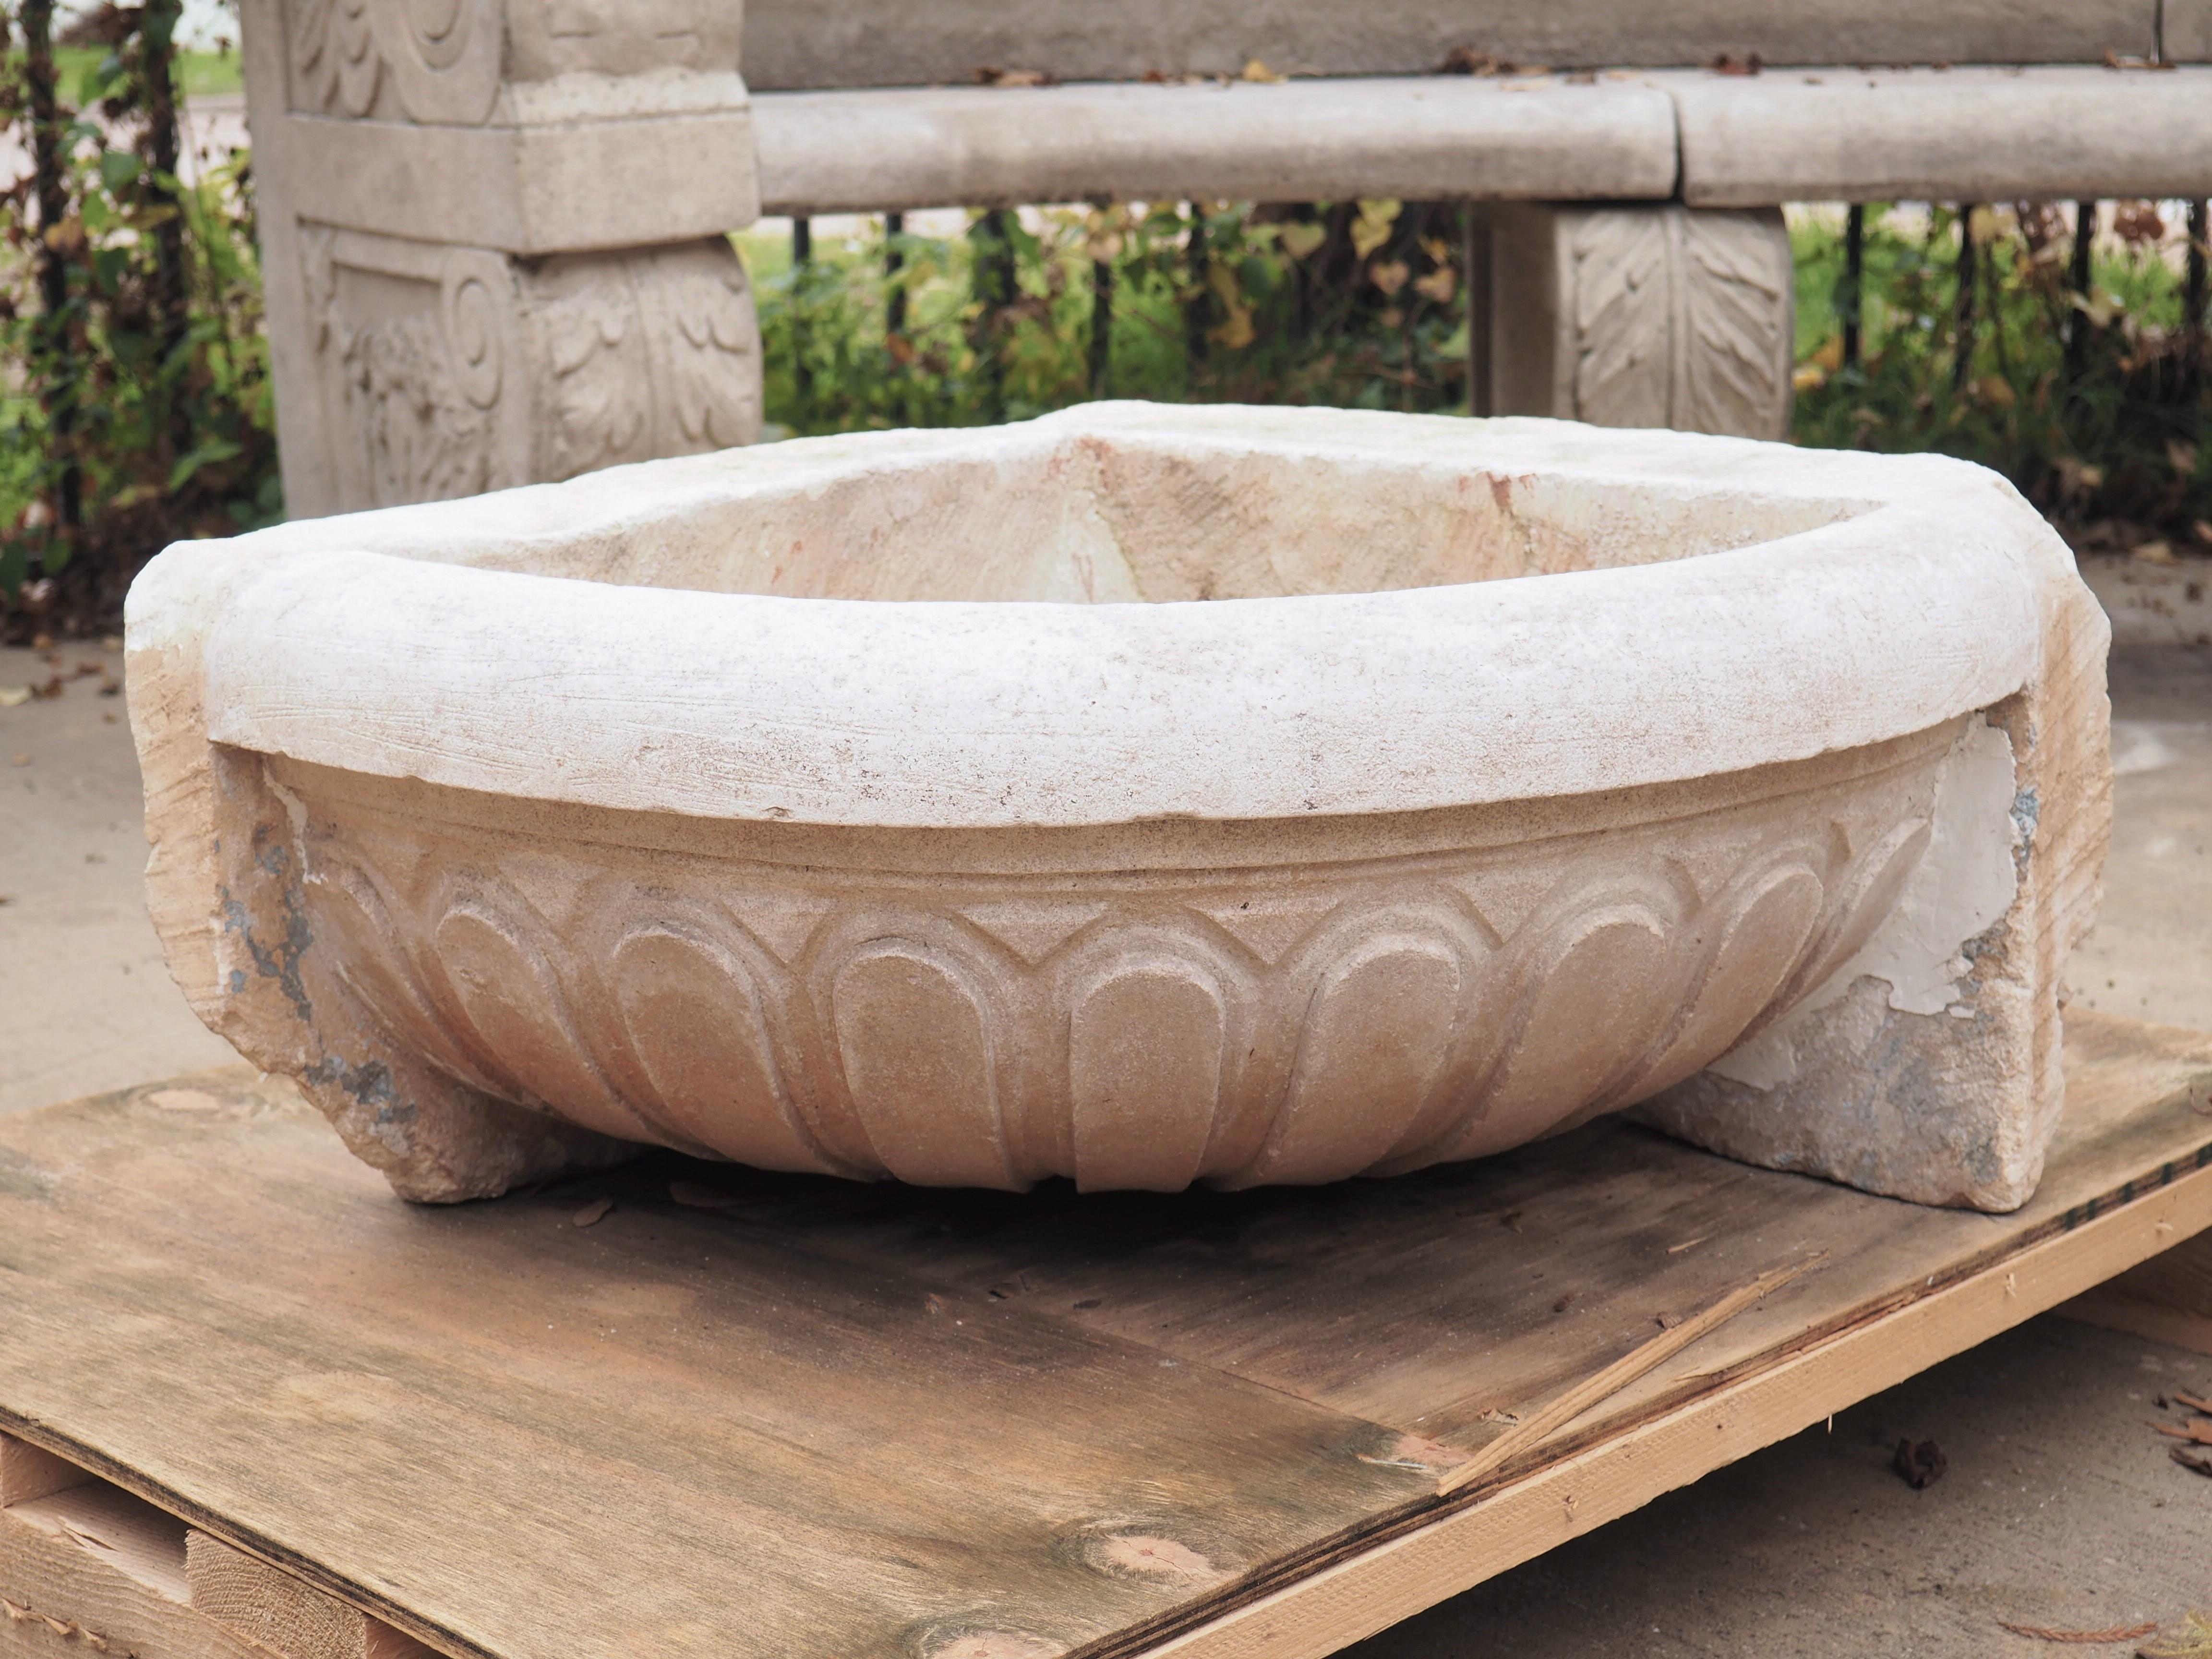 This stone piece was once the basin for a corner fountain or used as corner sink on a property in the rugged hills of Provence, France. It features a thick quarter-round rim surmounting thick gadrooning. With a unique wedge shape, and a drainage